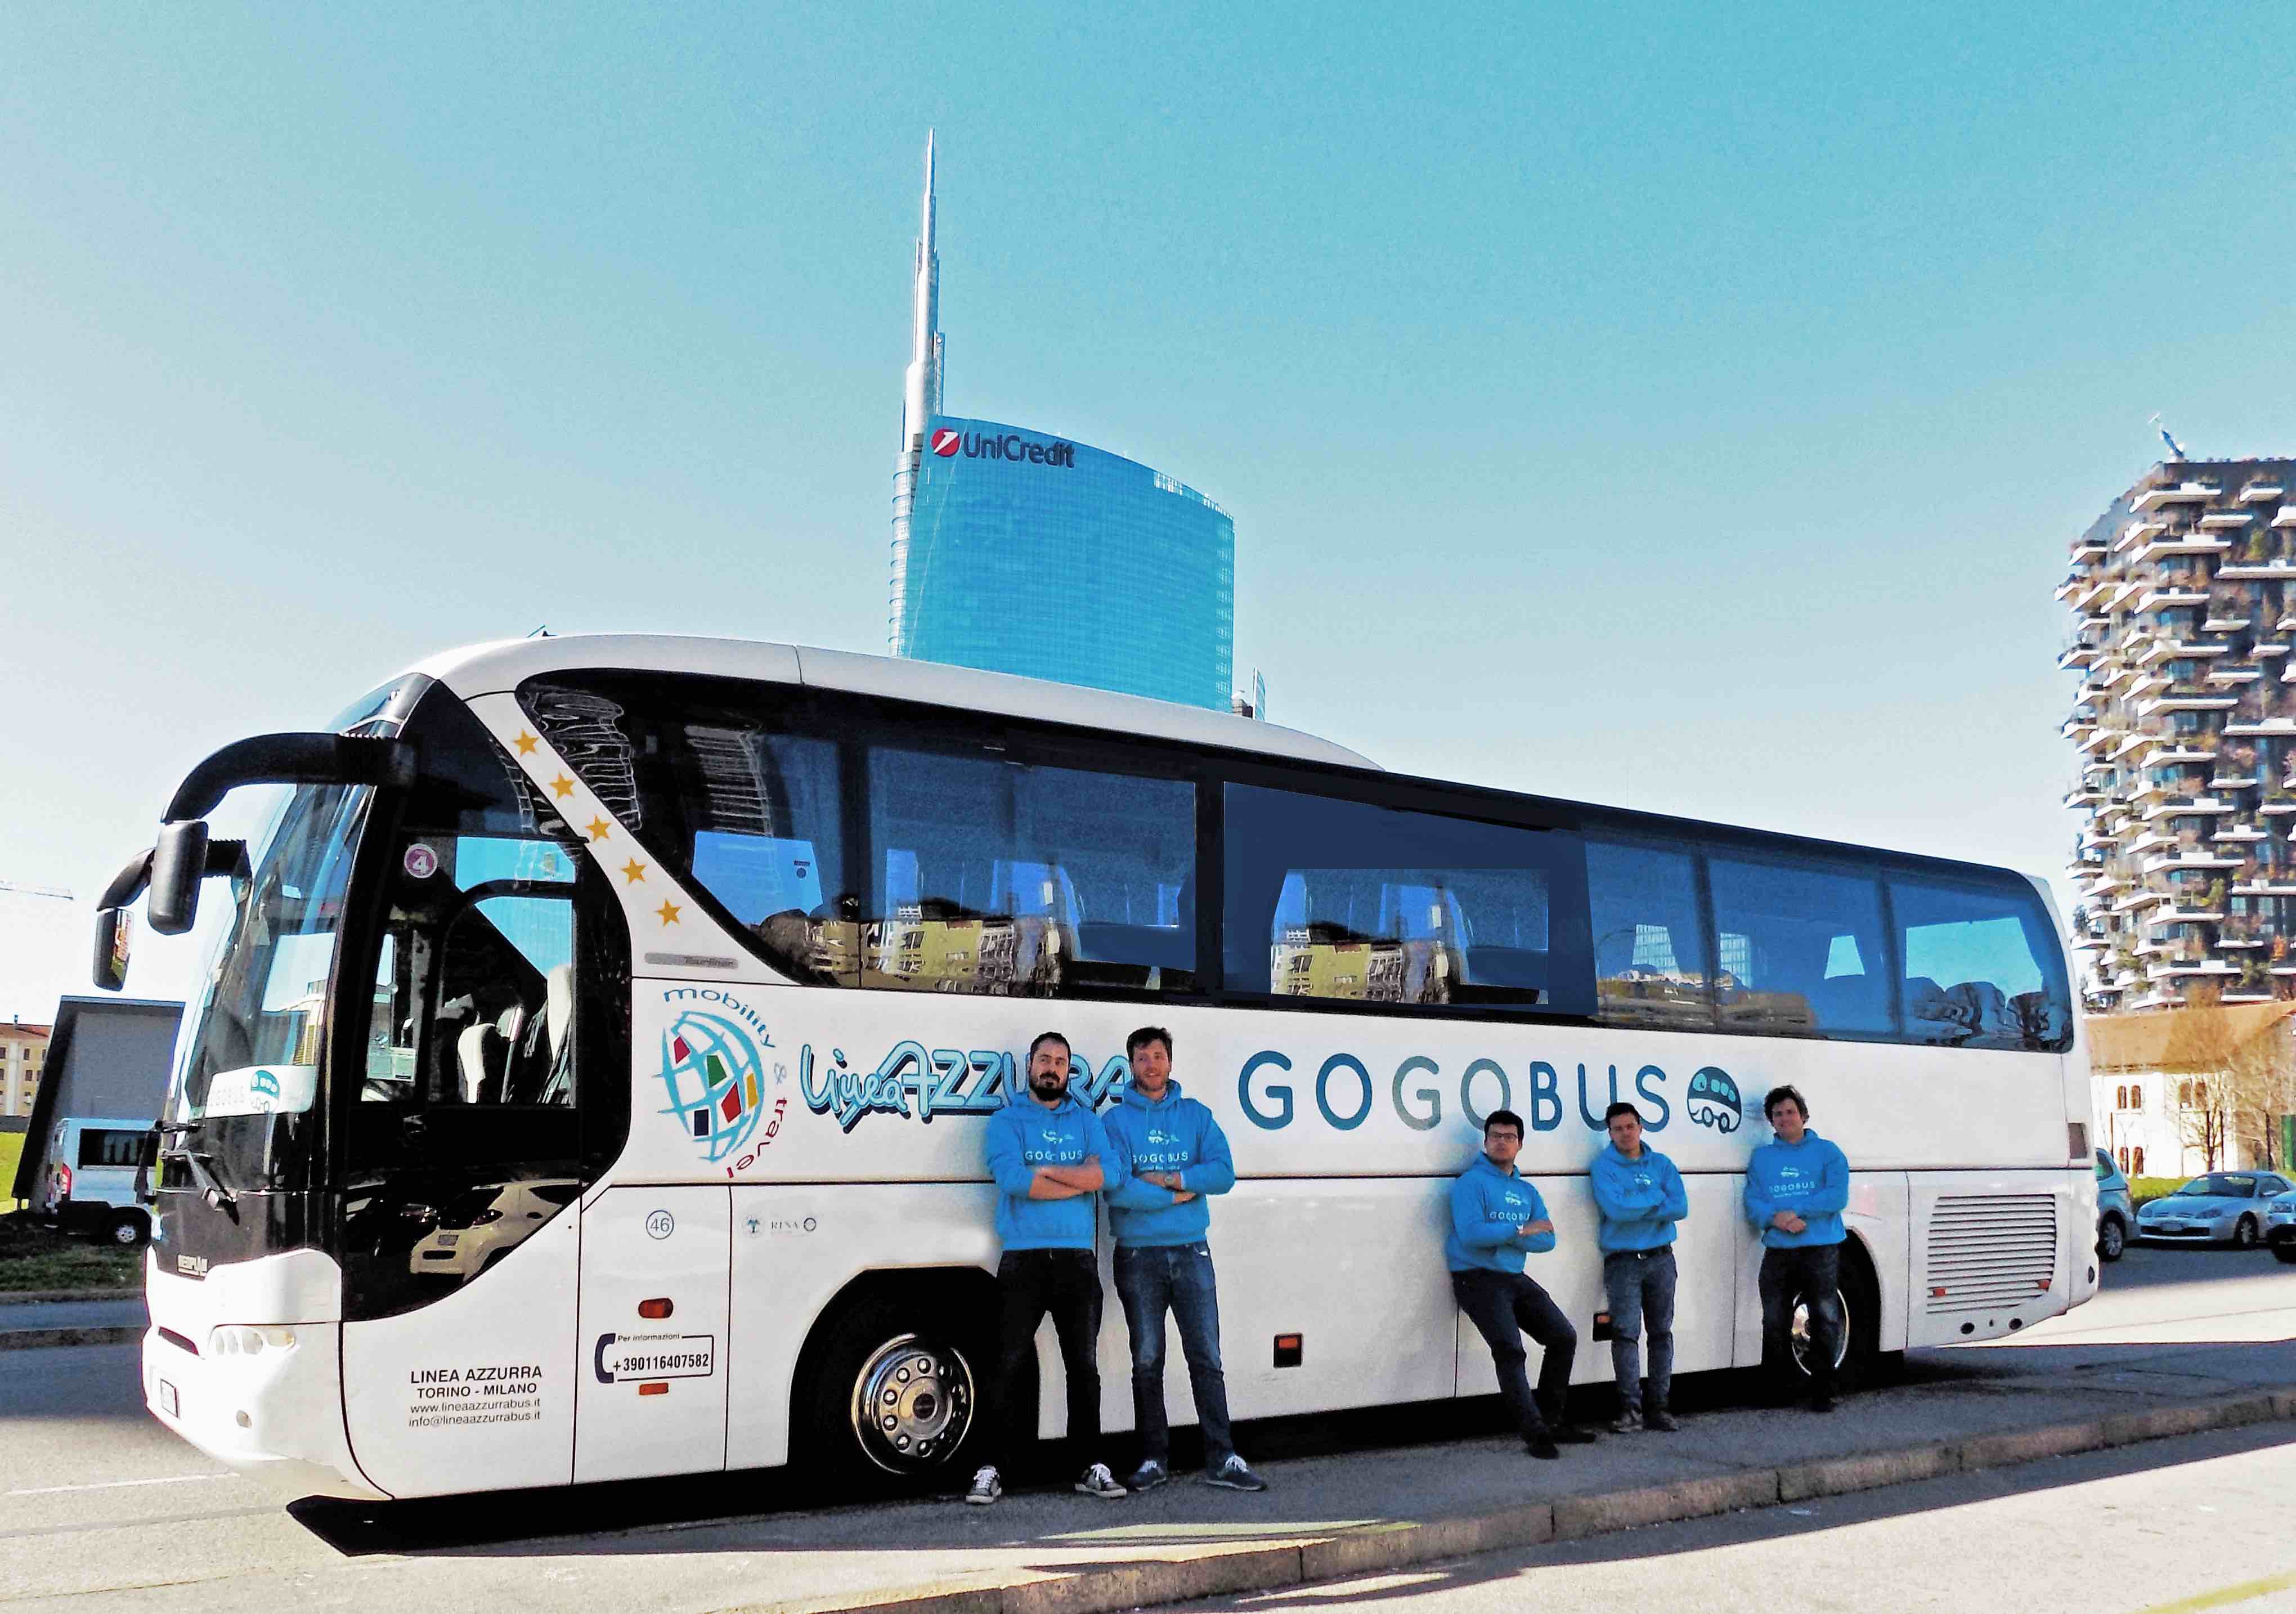 gogobus assicurazione axa assistance bus sharing startup